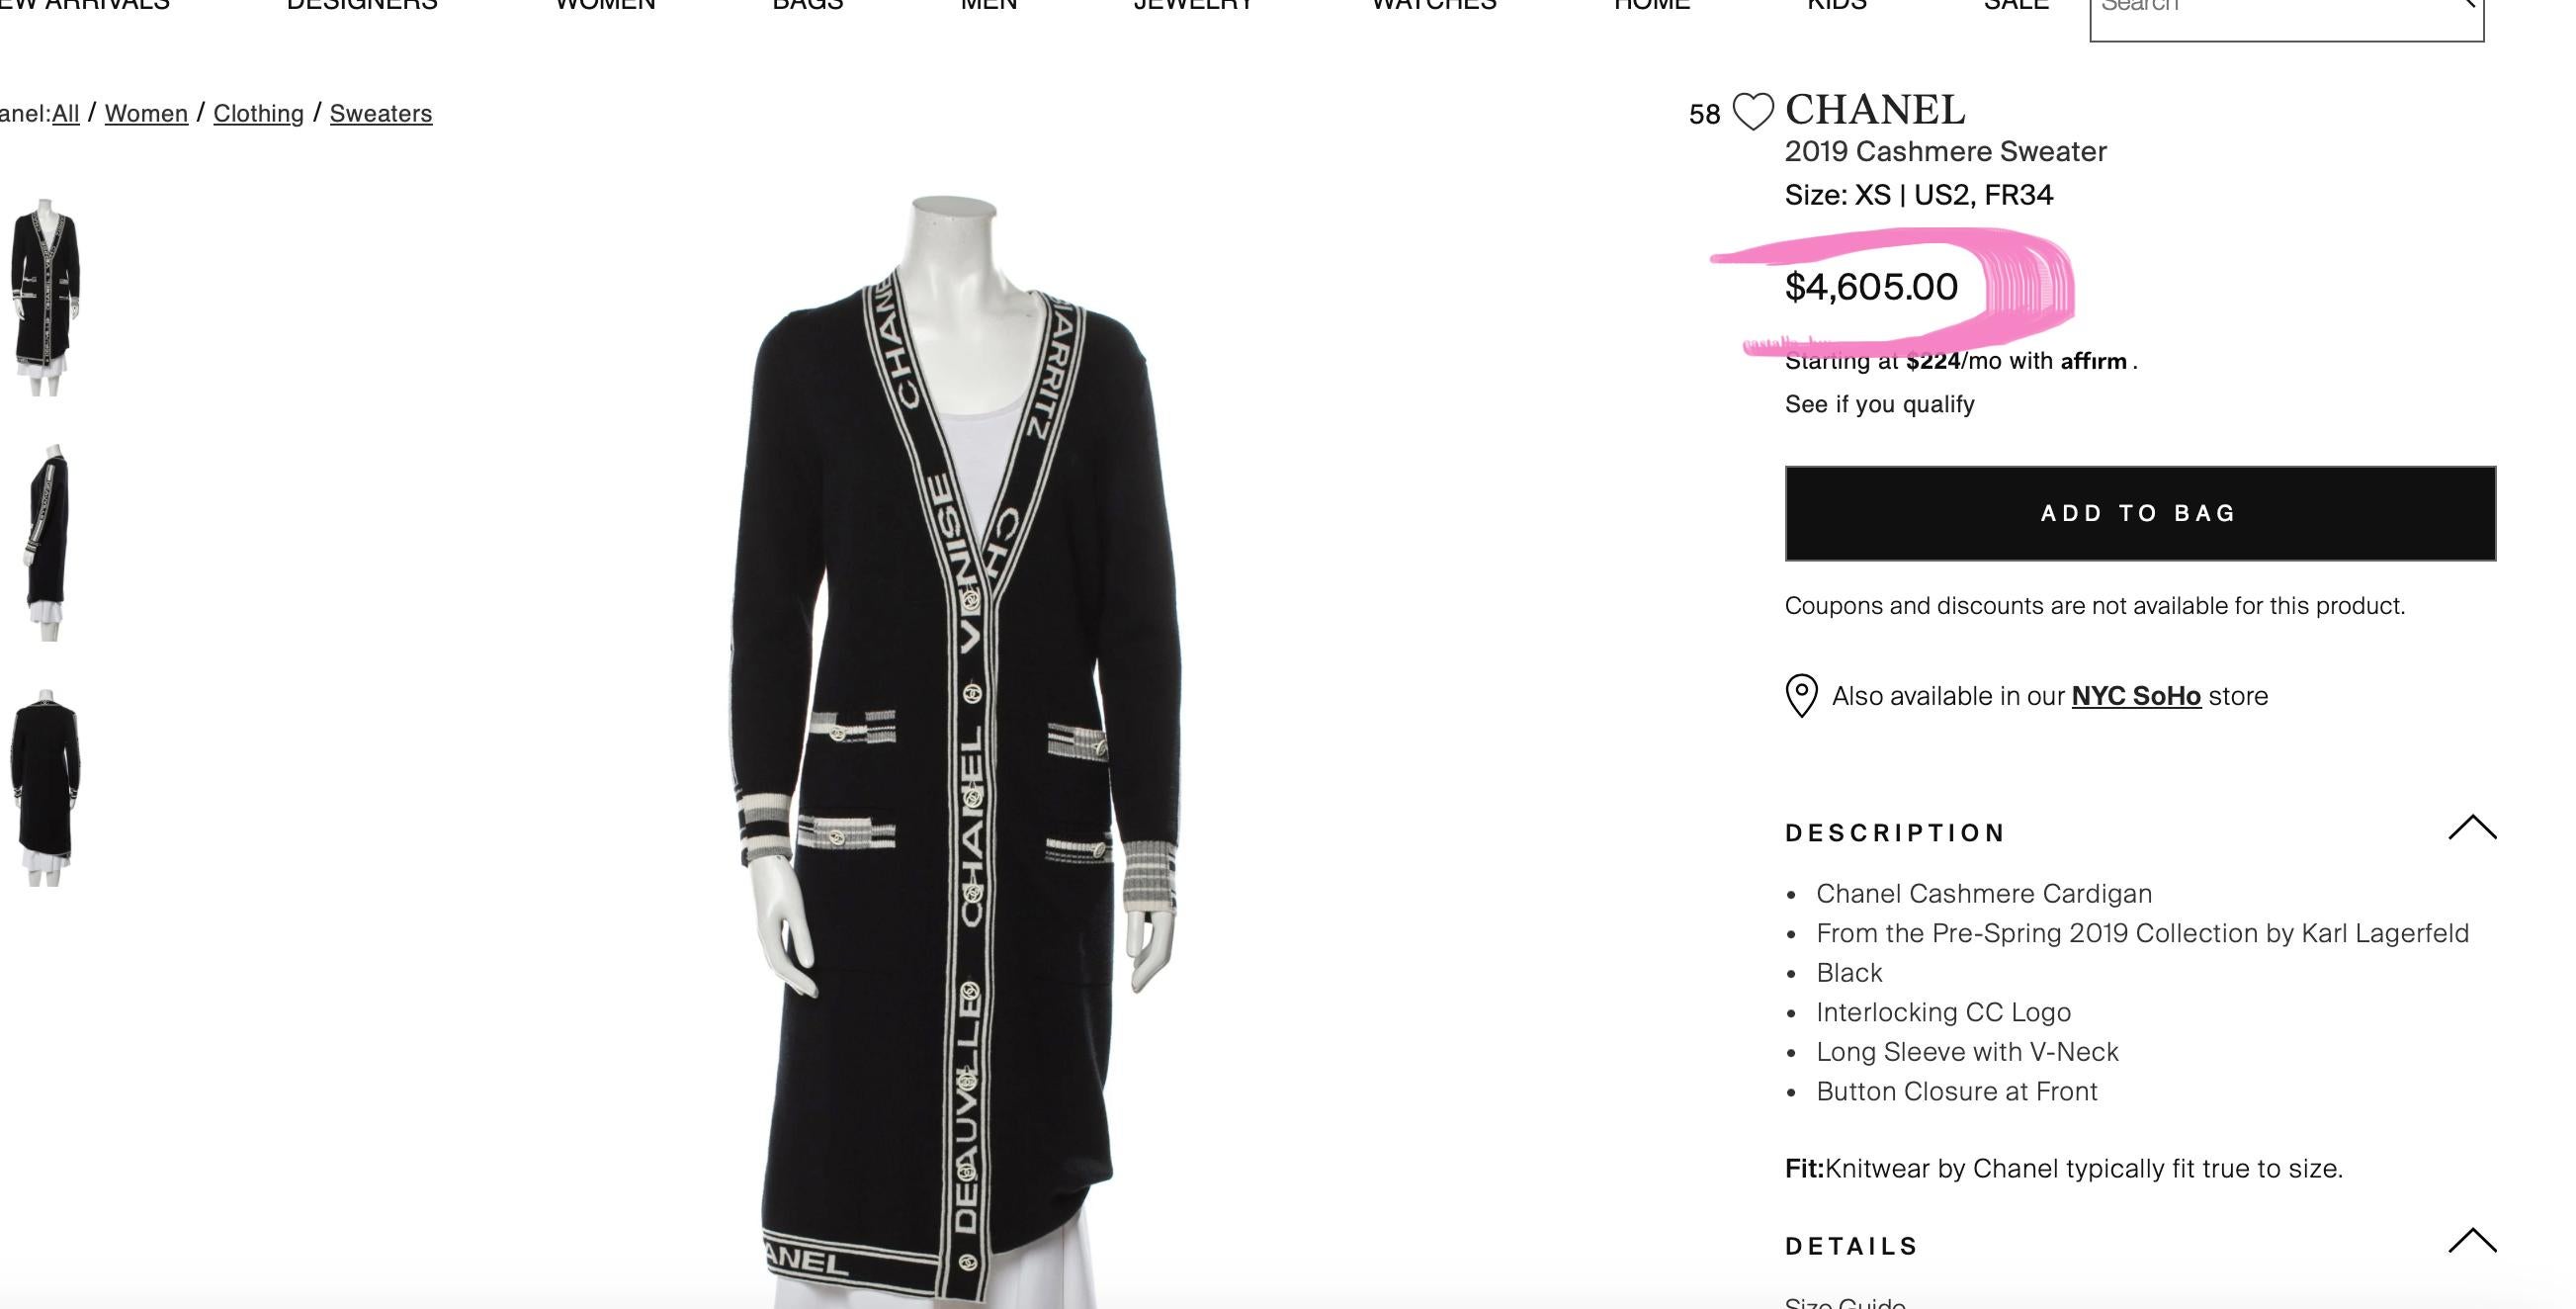 A very rare piece! Impossible to find in maxi length variant!
Same model (but shorter) prices on TRR for 4,650$ (pre-owned)
Iconic Chanel Paris / Deauville / Biarritz Maxi Cashmere Cardigan with CC logo from 2019 Spring Collection, 19P 
As seen on